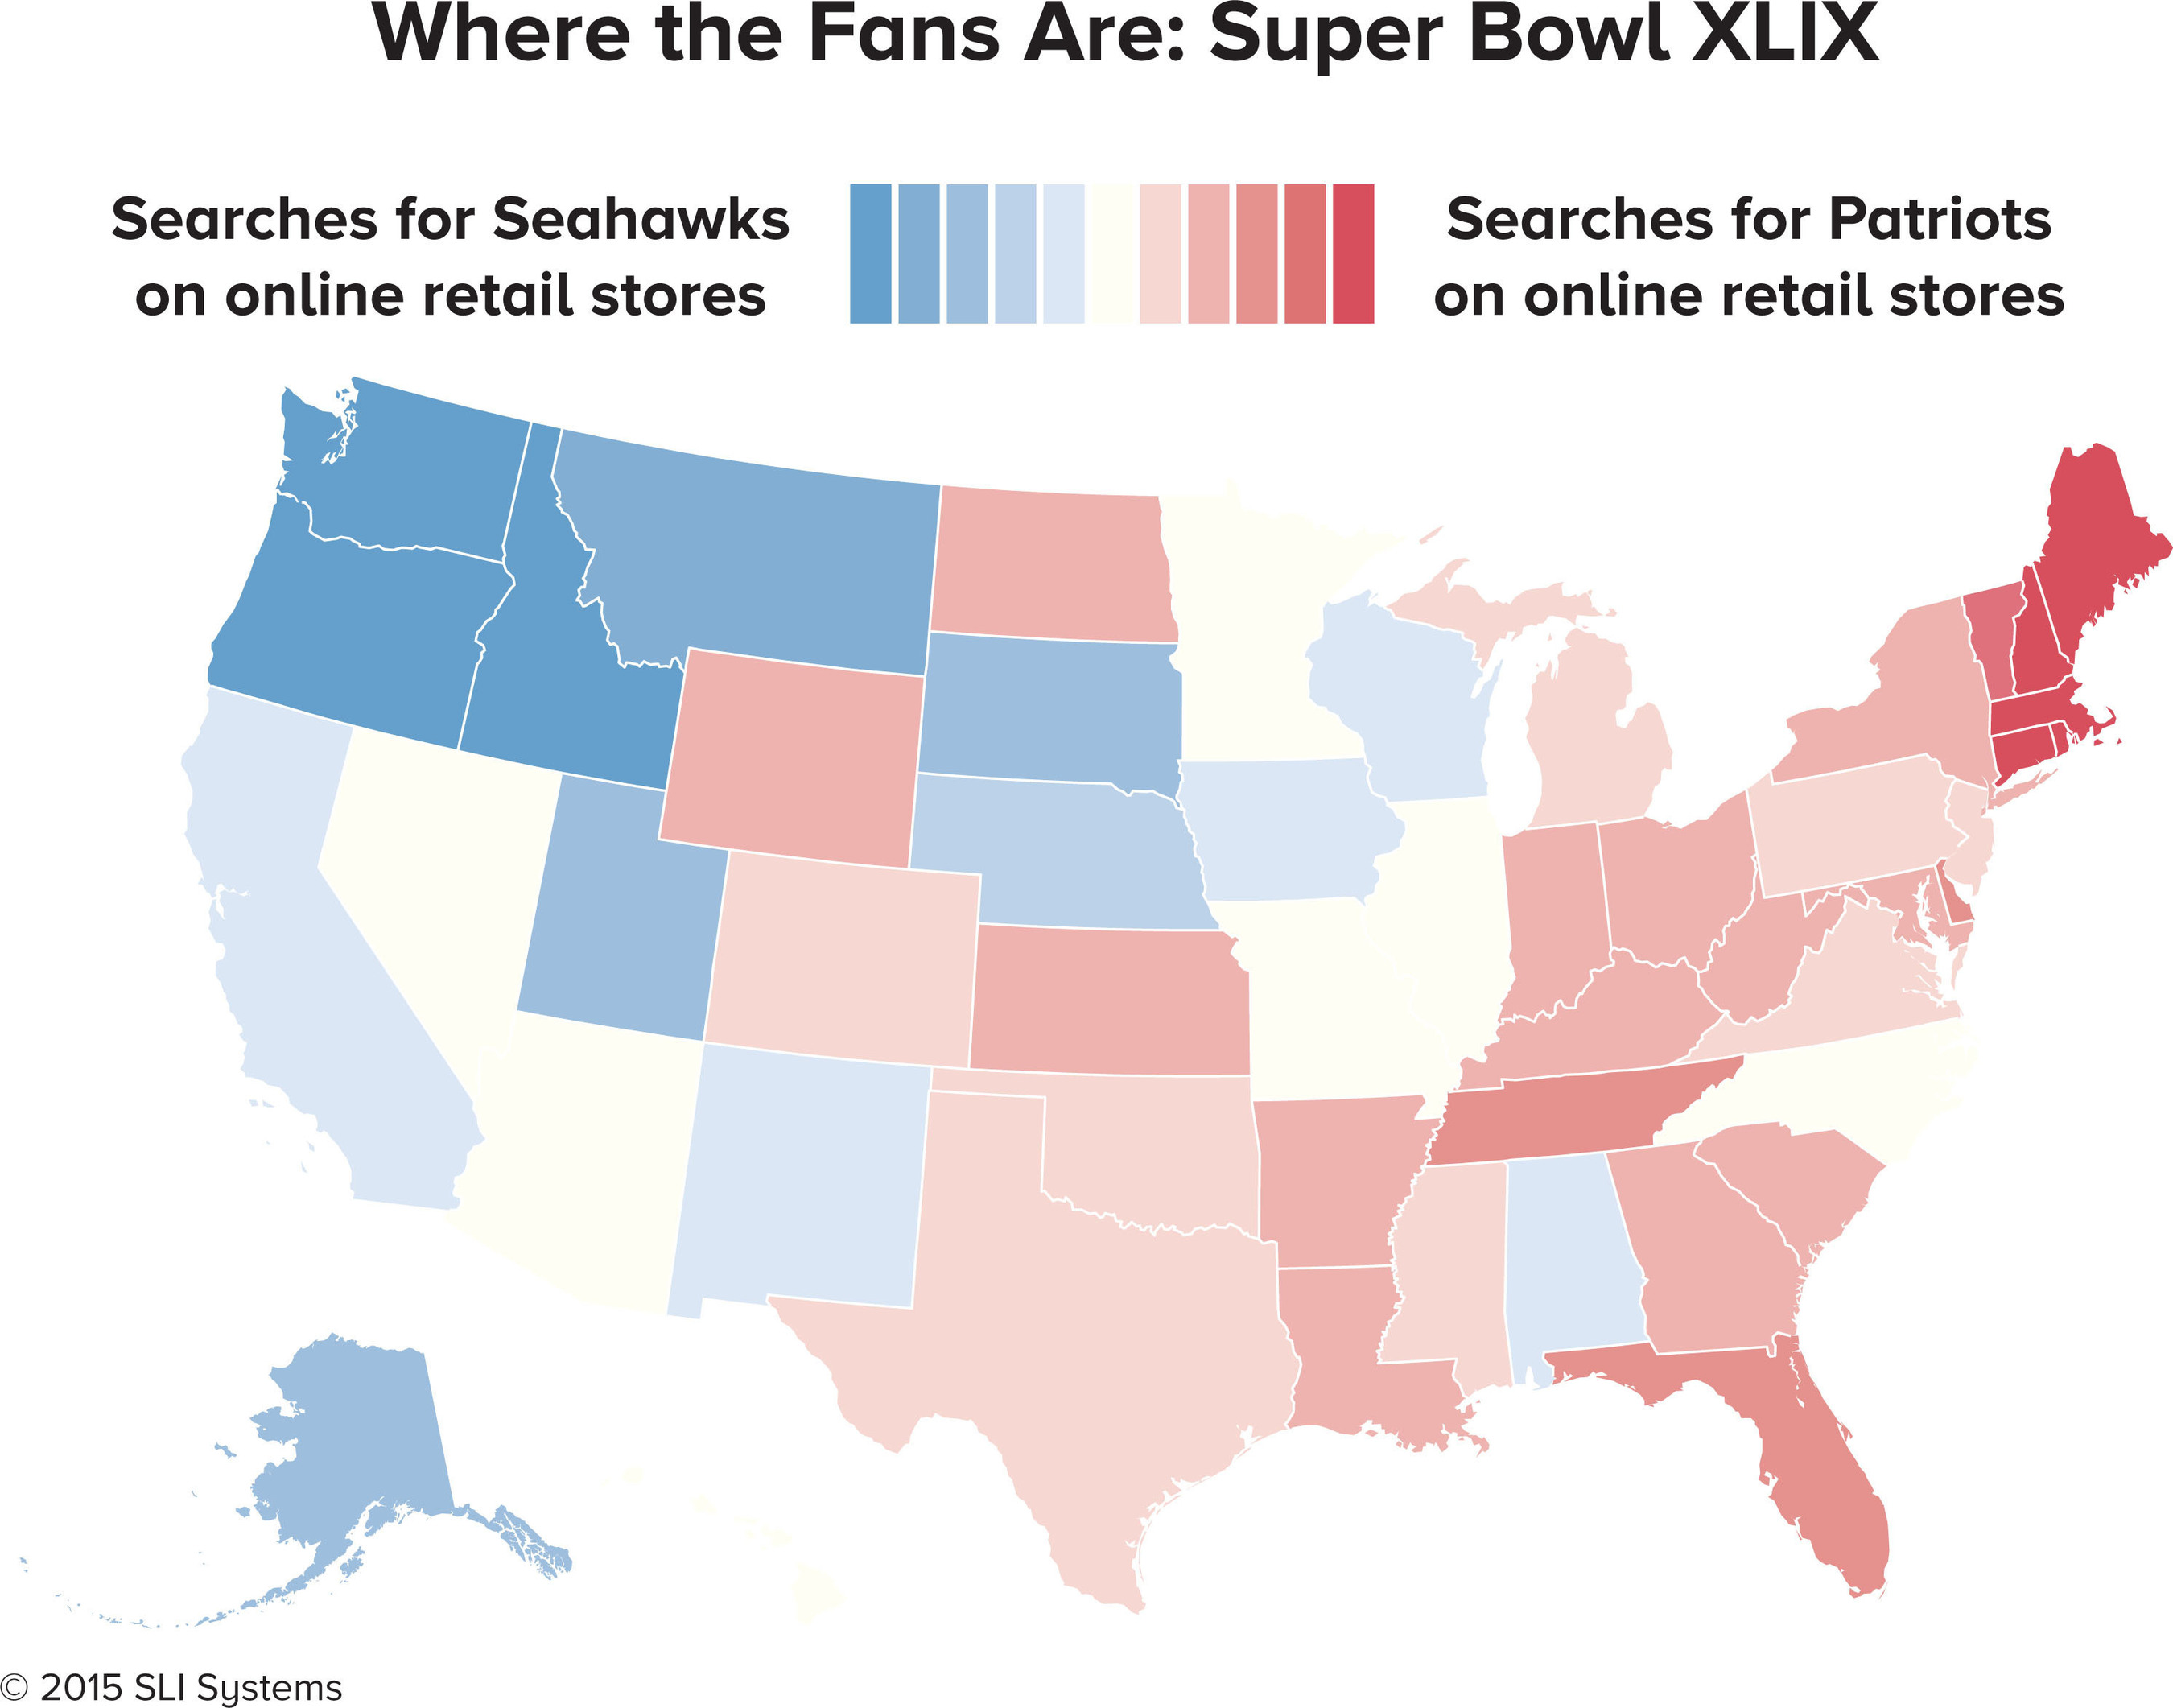 Super Bowl Map Reveals "Where the Fans Are" with State-by-State Look at Patriots and Seahawks' Popularity